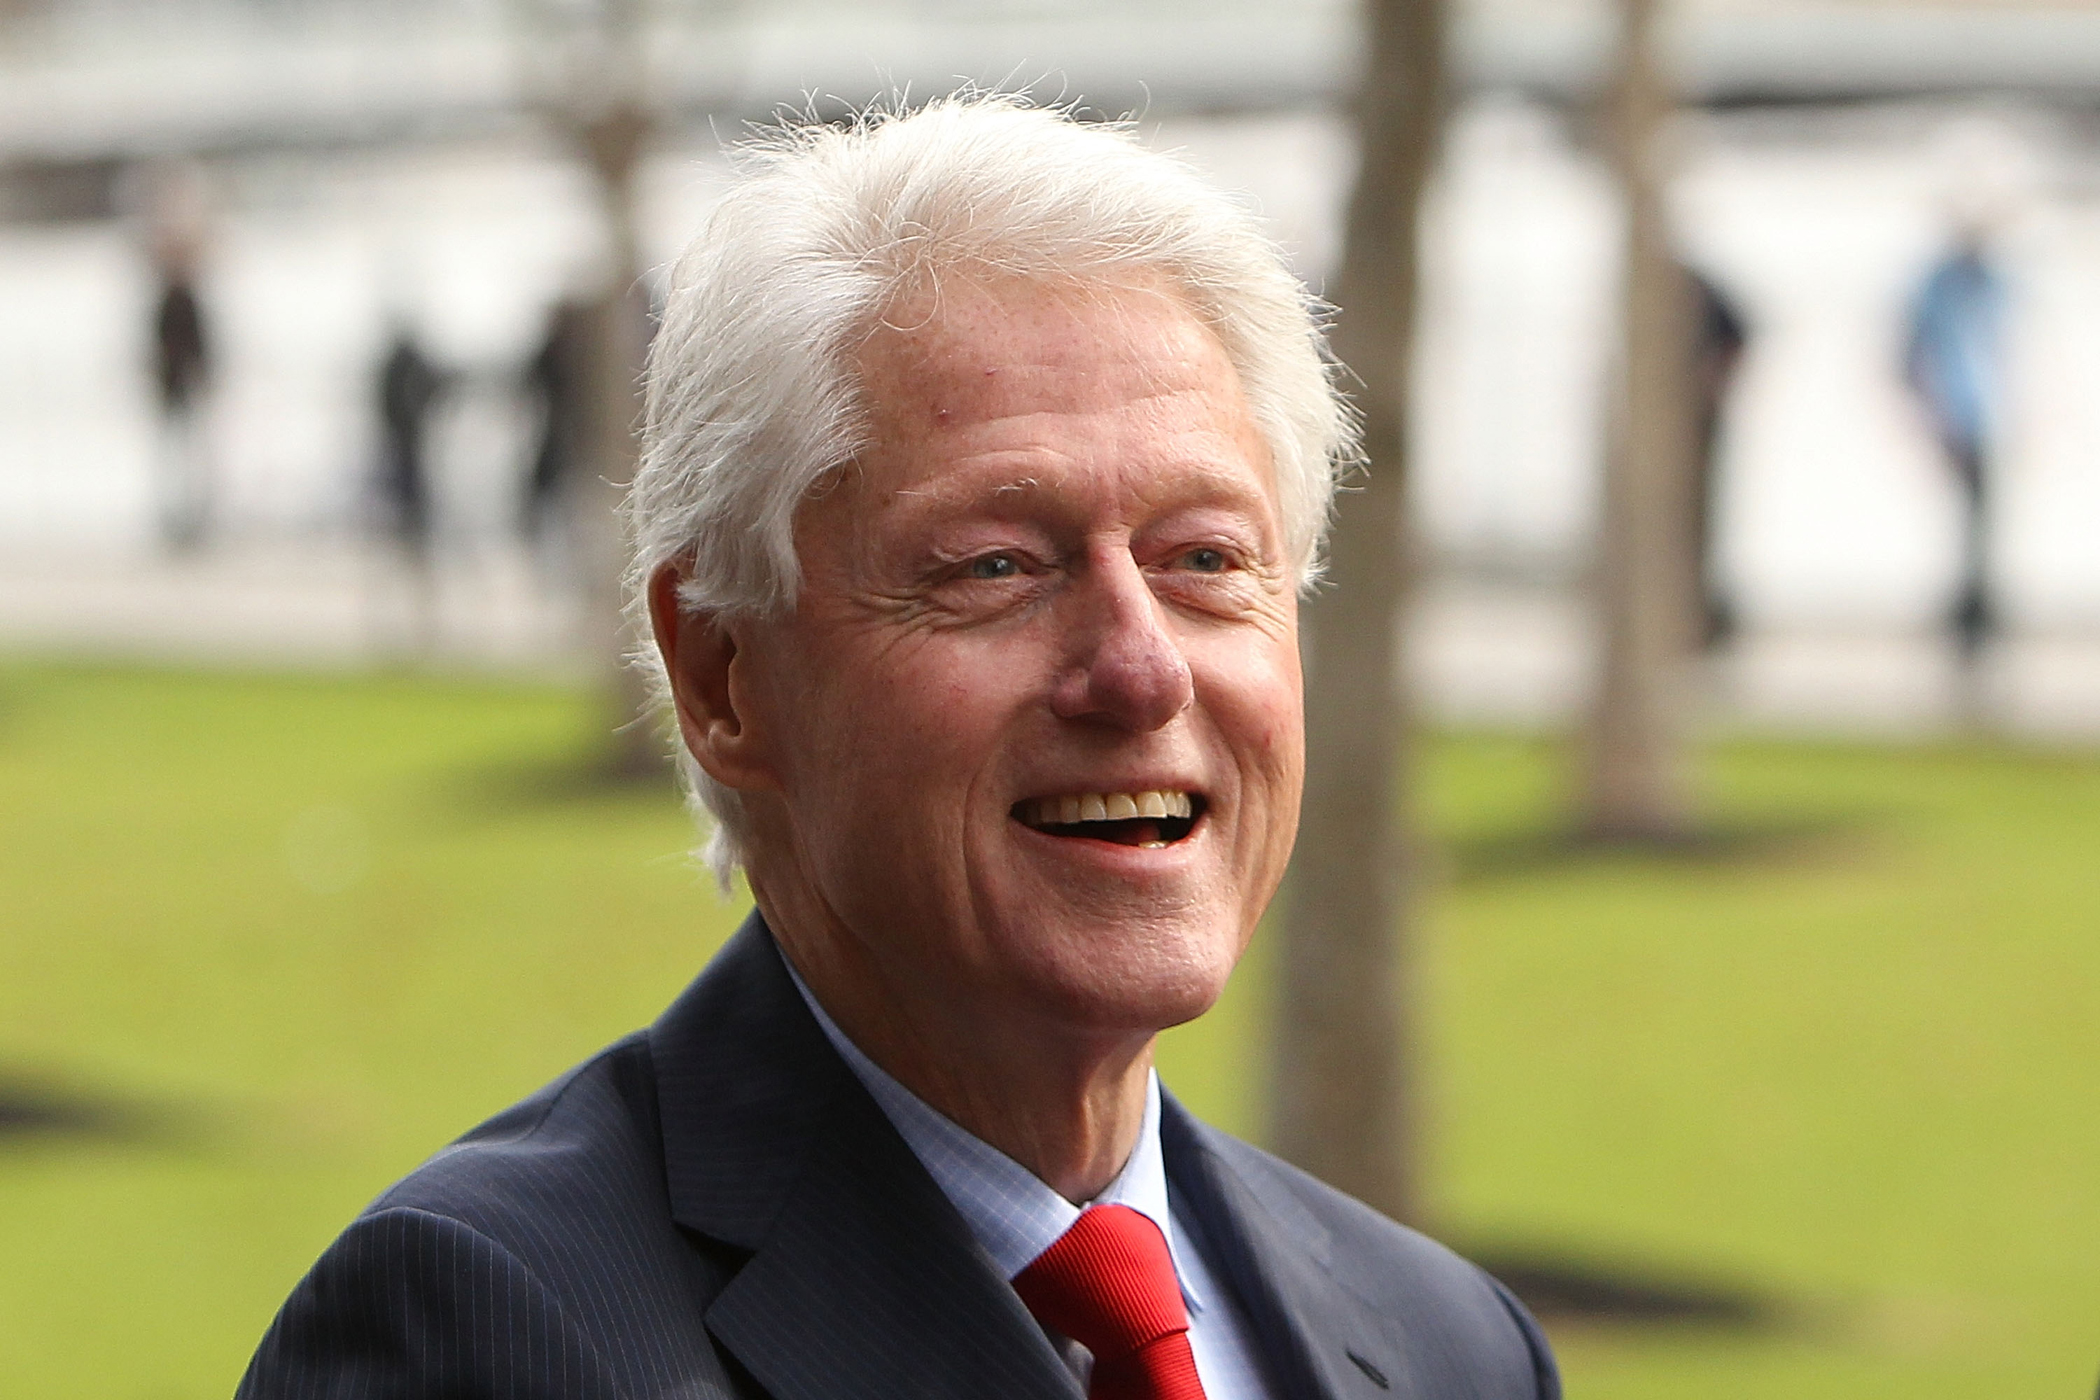 A special birthday message to Bill Clinton